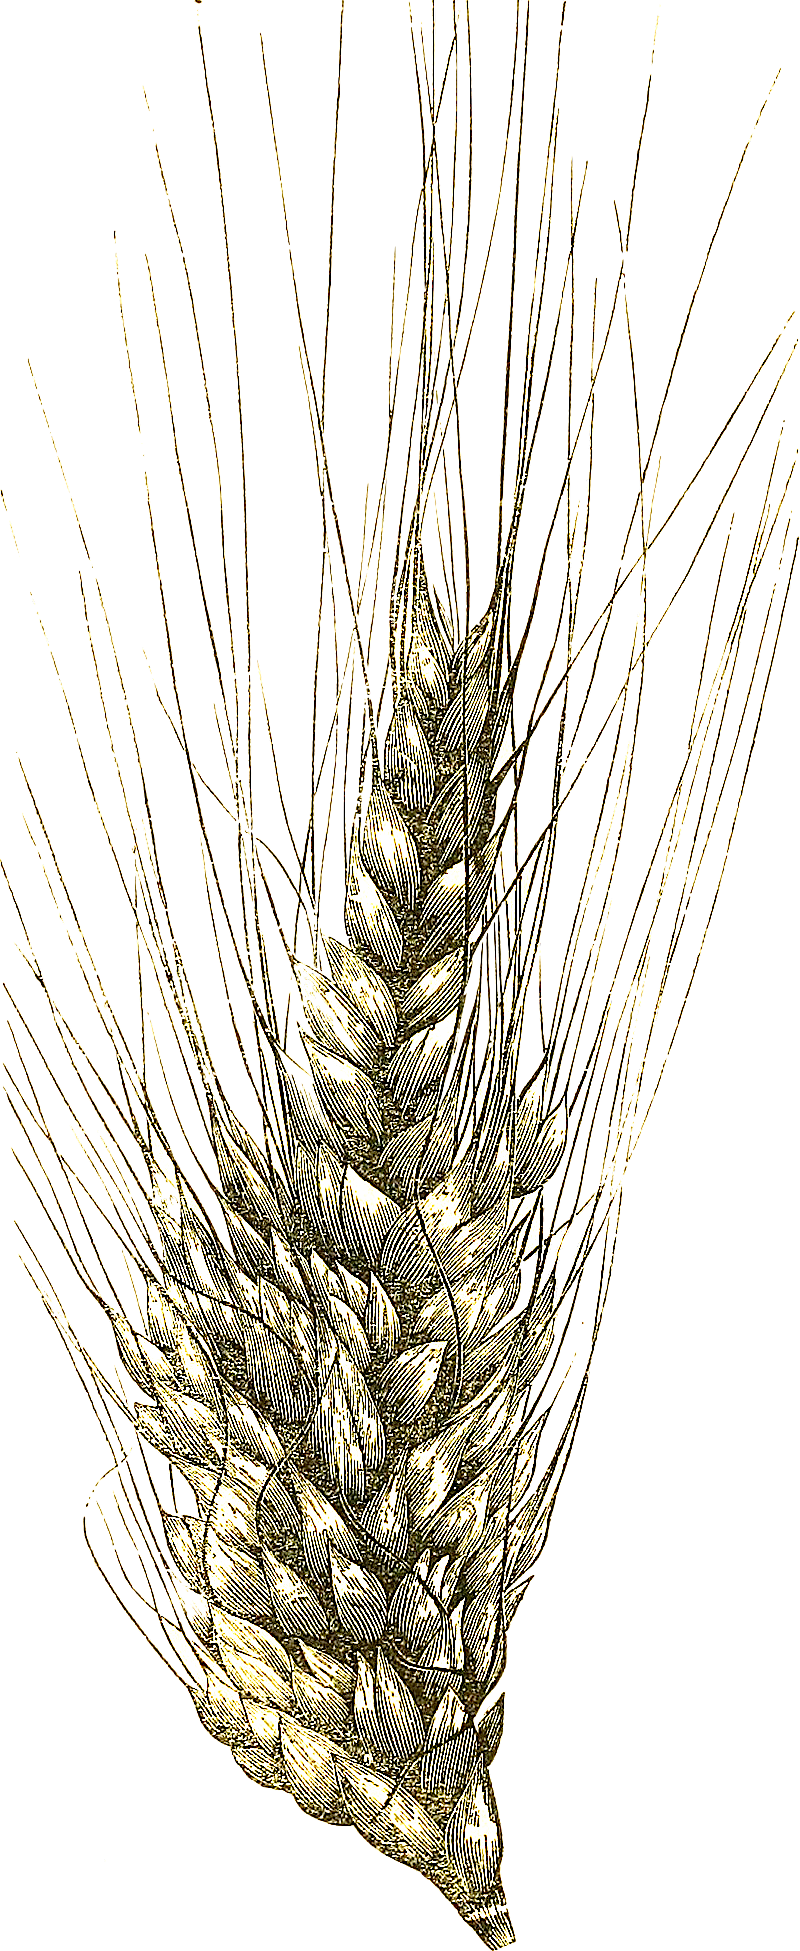 graphic image of wheat plant